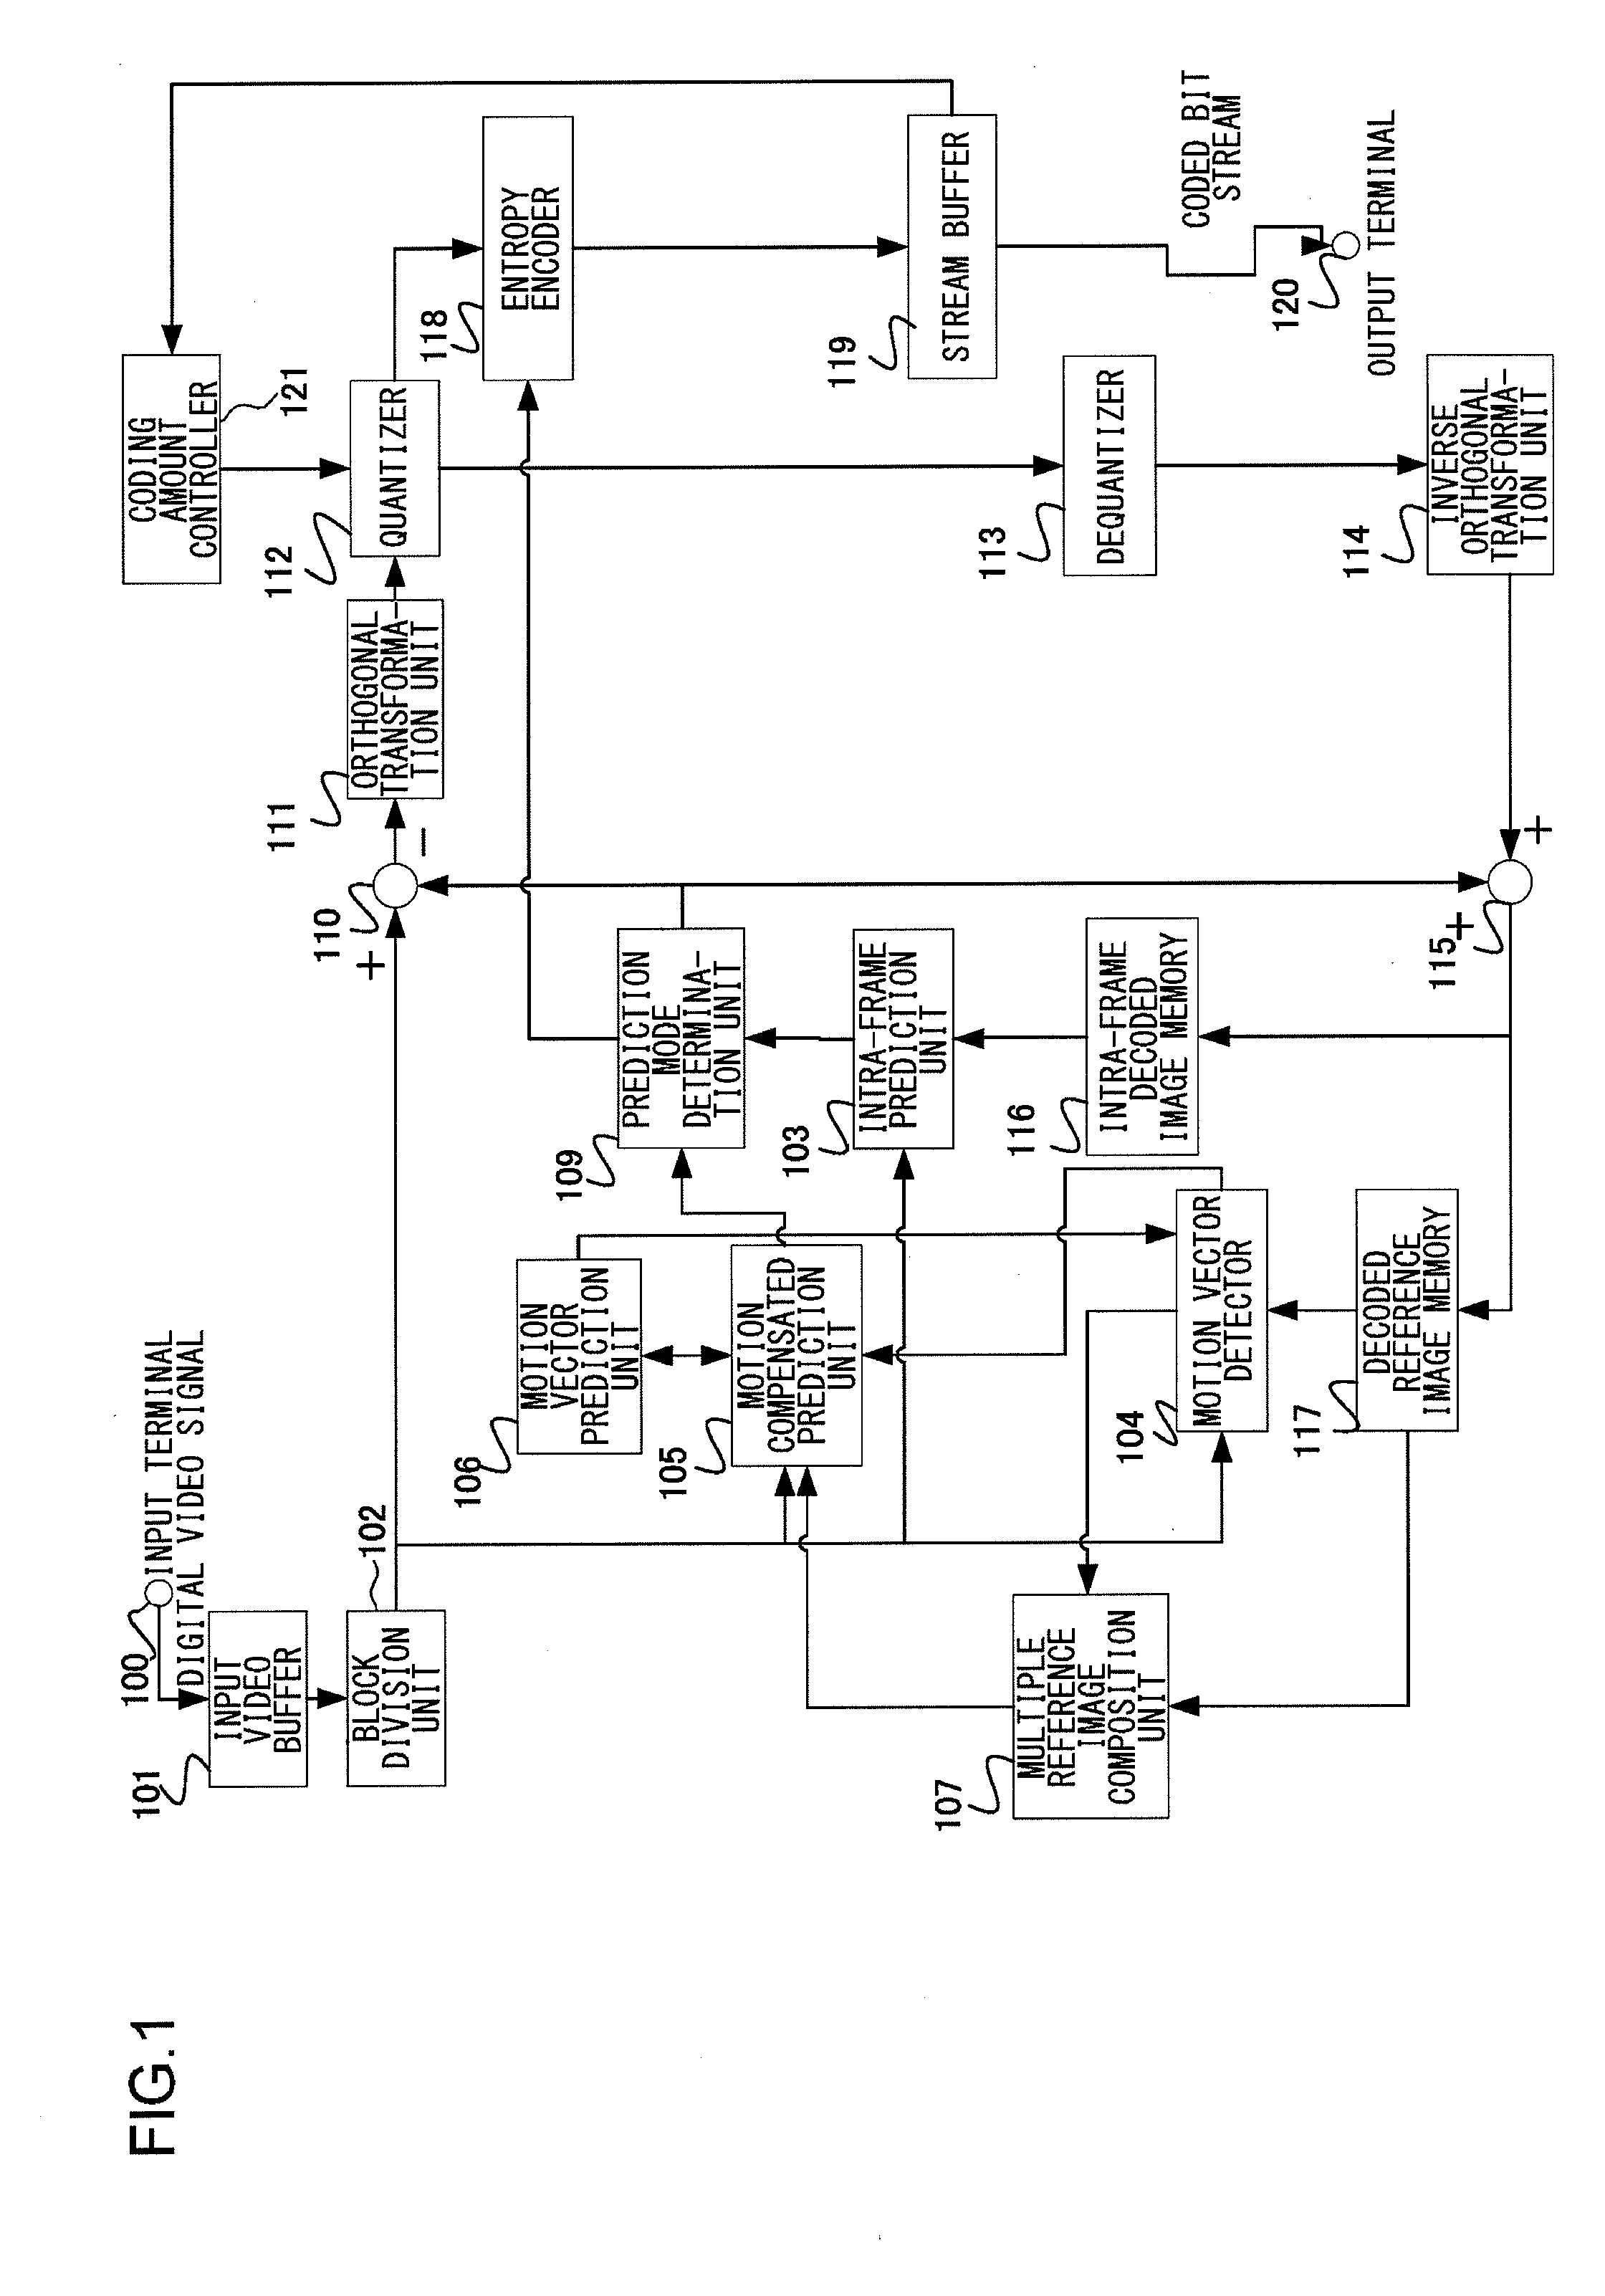 Video coding apparatus, video coding method and video coding program, and video decoding apparatus, video decoding method and video decoding program